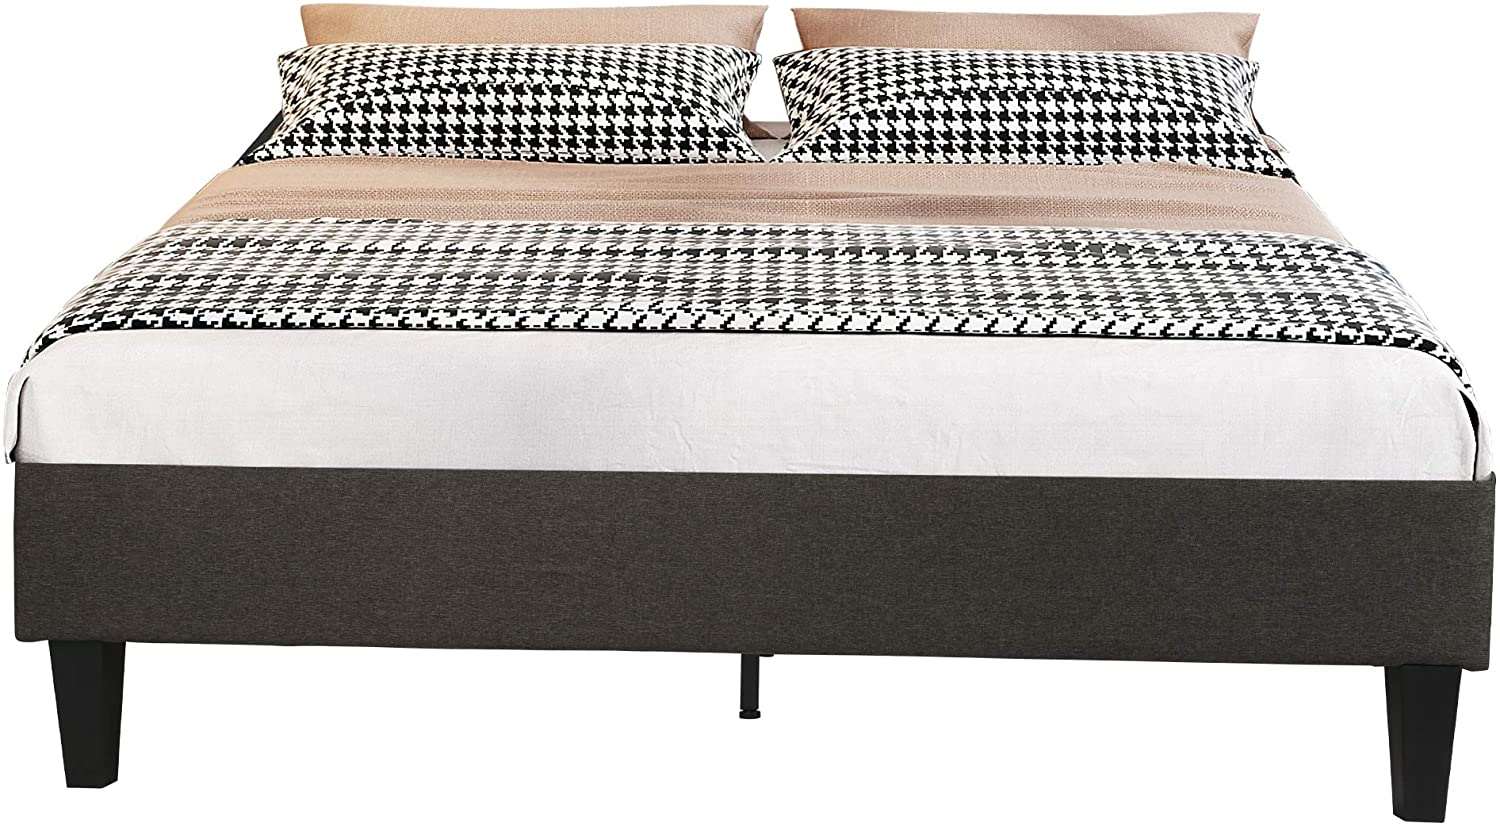 14 Inch Upholstered Platform Bed Frame Mattress Foundation with Wood Slat Support No Box Spring Needed Dark Gray